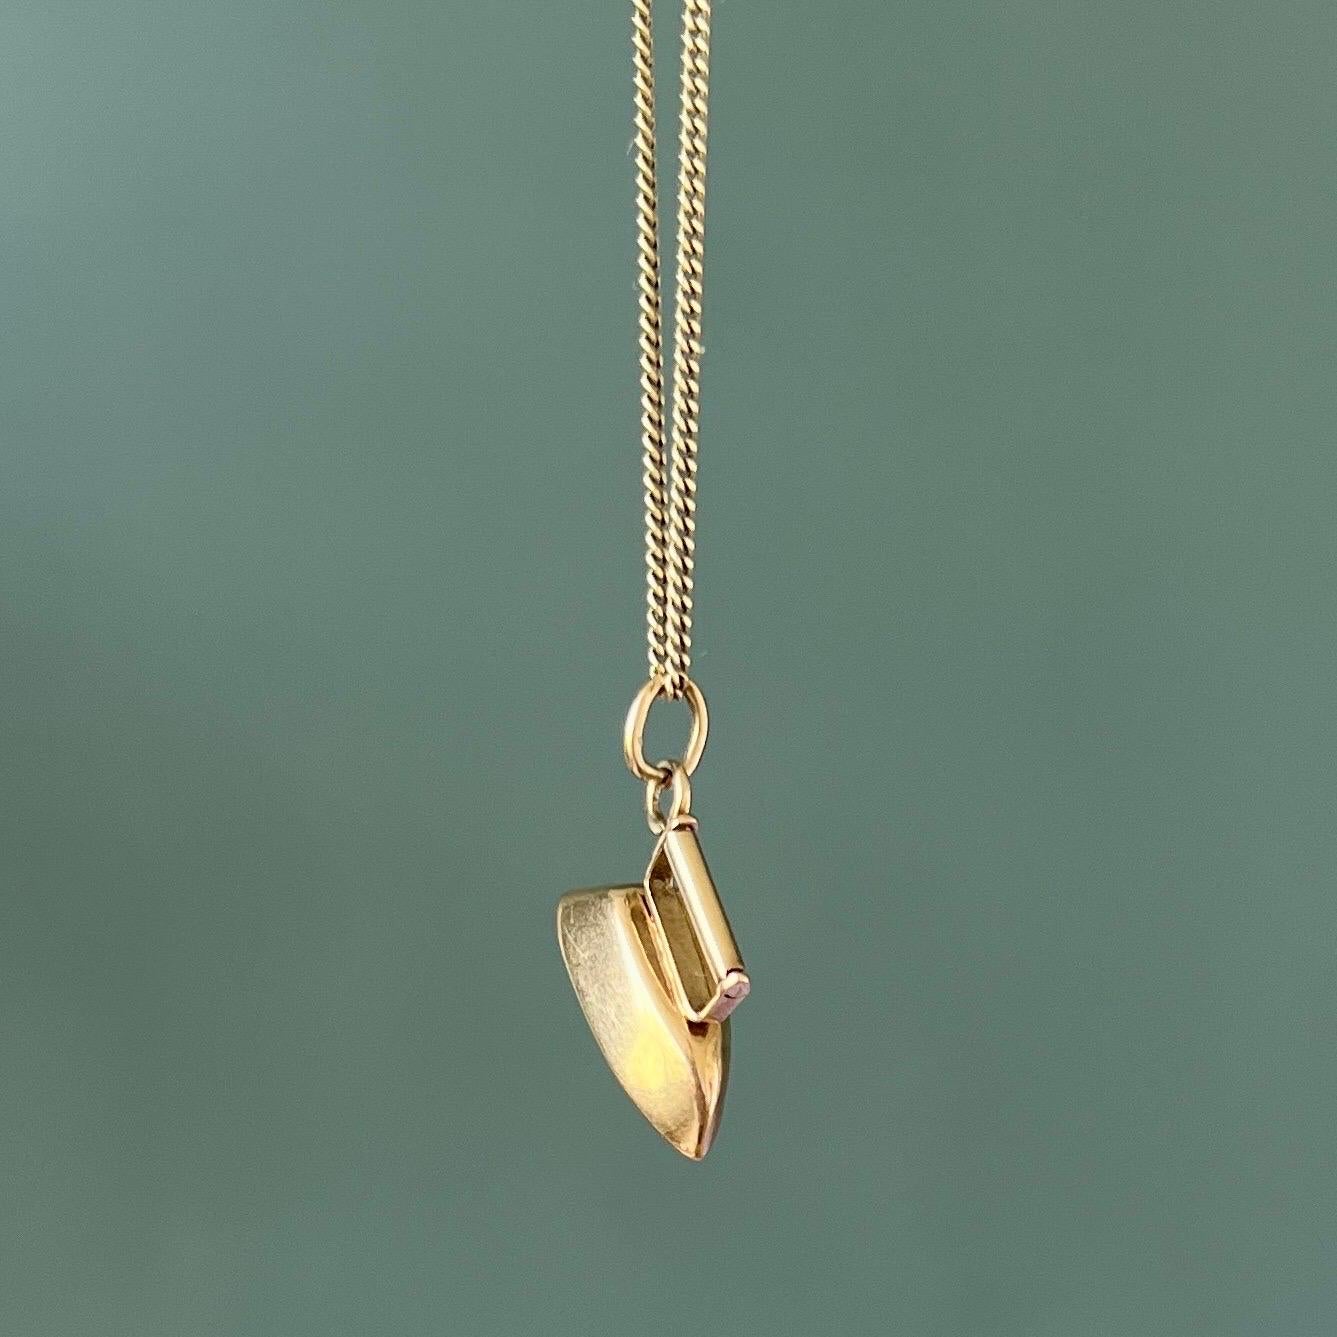 A lovely vintage gold flatiron charm pendant. This household appliance is nicely designed with rotatable handle. The charm is created in 14 karat yellow gold. Charms are great to collect as wearable memories, it has a symbolic and often a